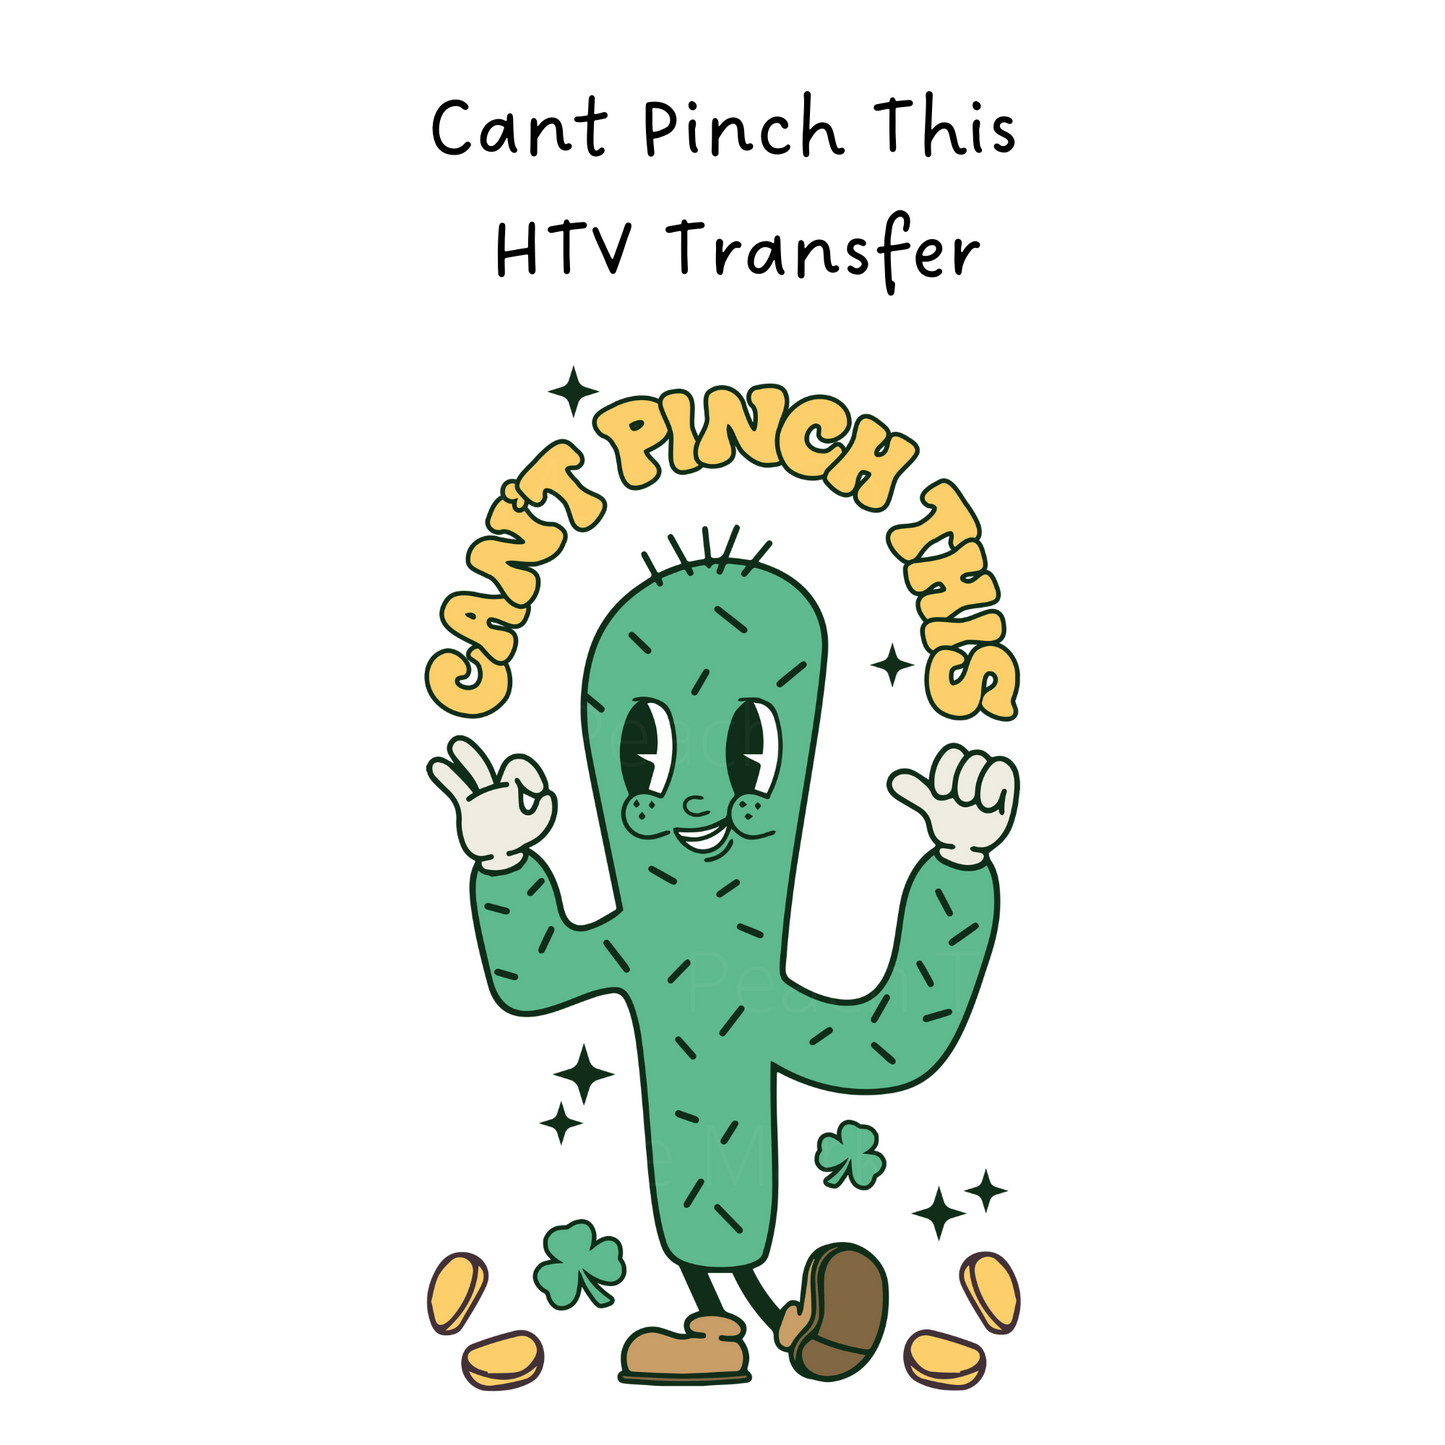 Can't Pinch This HTV Transfer